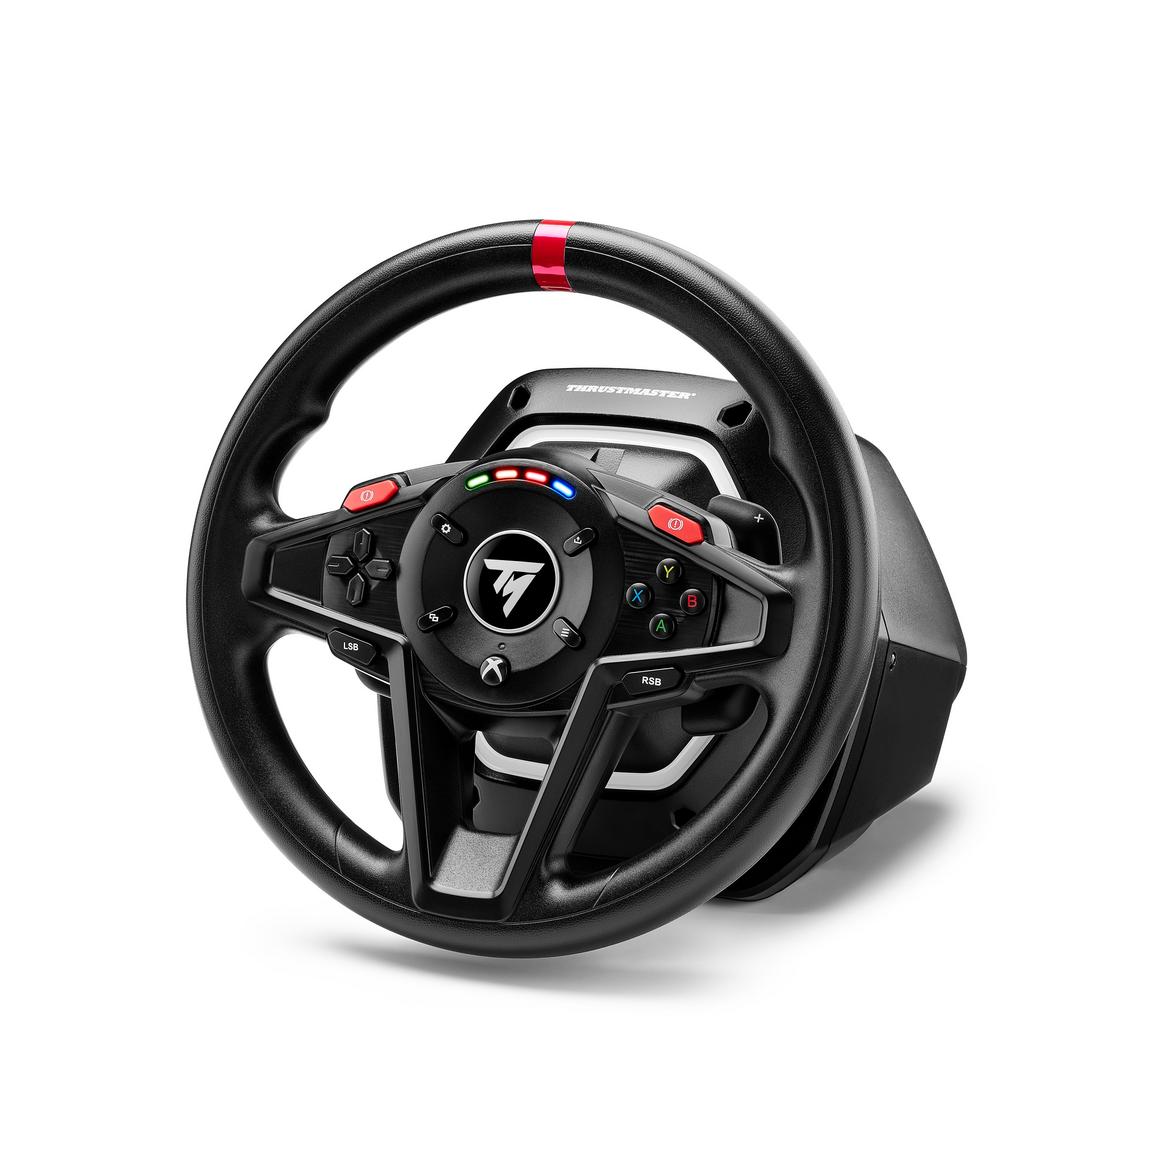 gamestop.com | Thrustmaster T128 X Racing Wheel for Xbox Series X/S, Xbox One, and PC